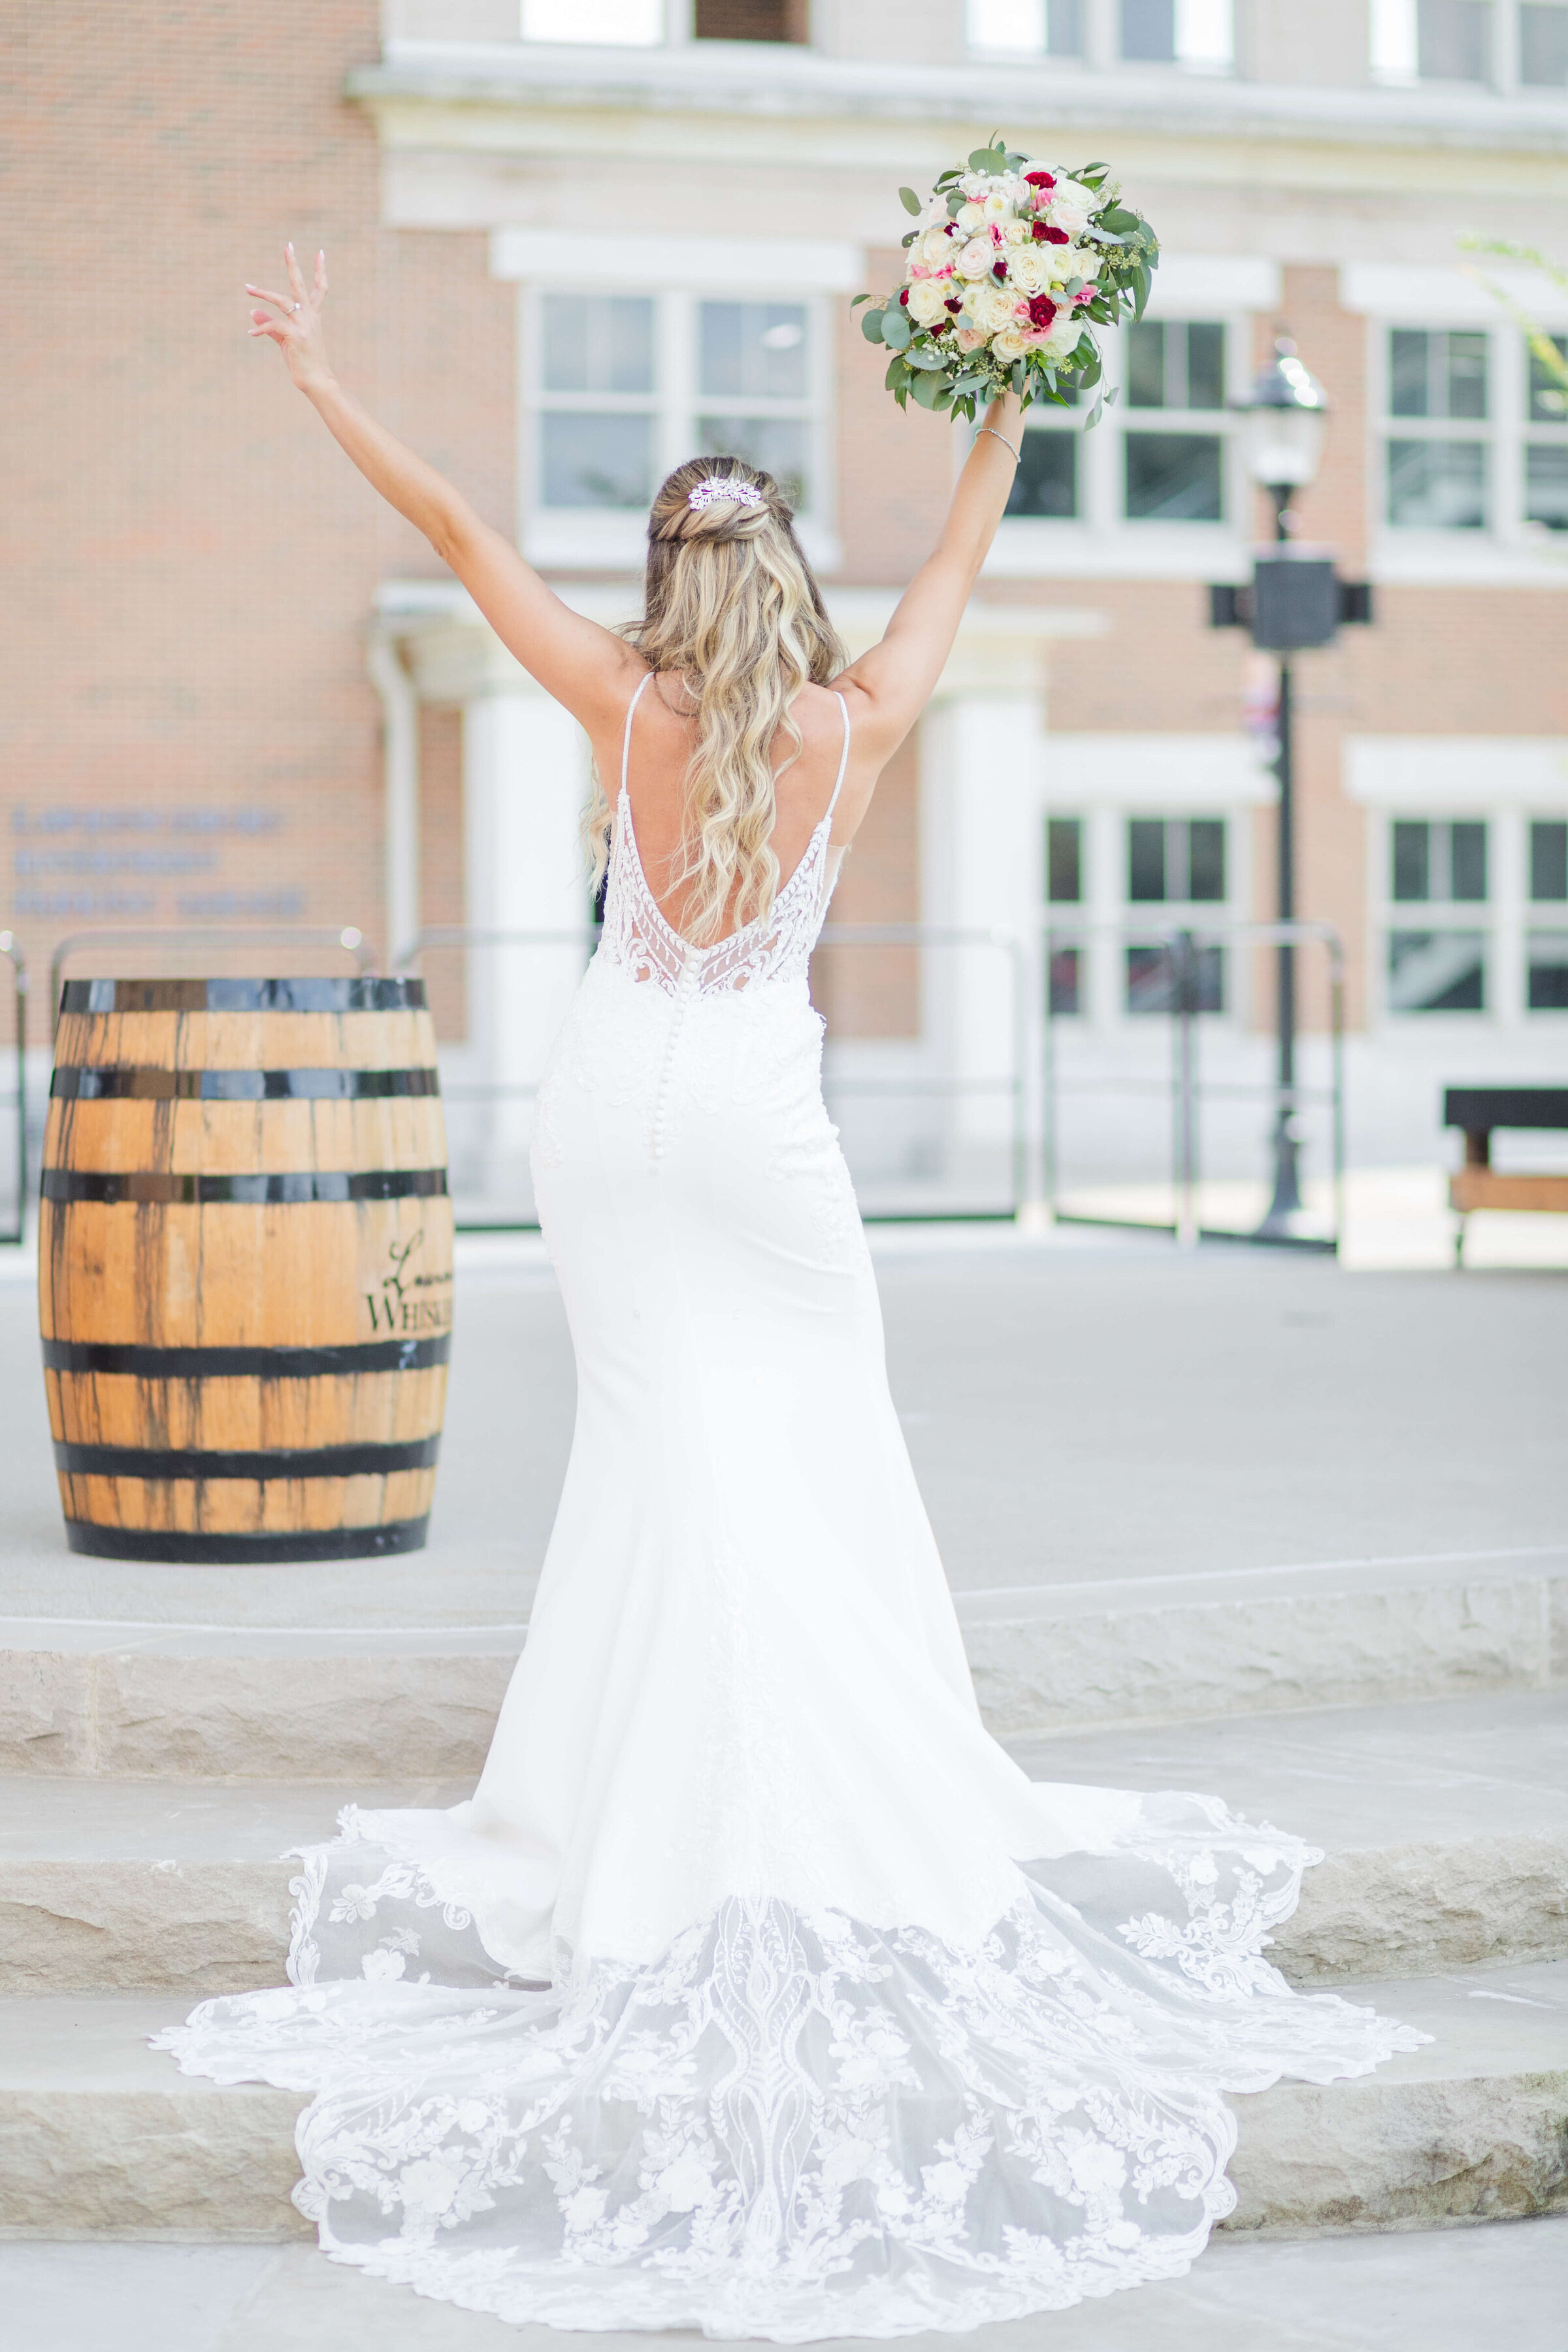 A bride has her back to the camera as she waves her hands in the area making the peace sign with one hand and holding her bouquet in the other.